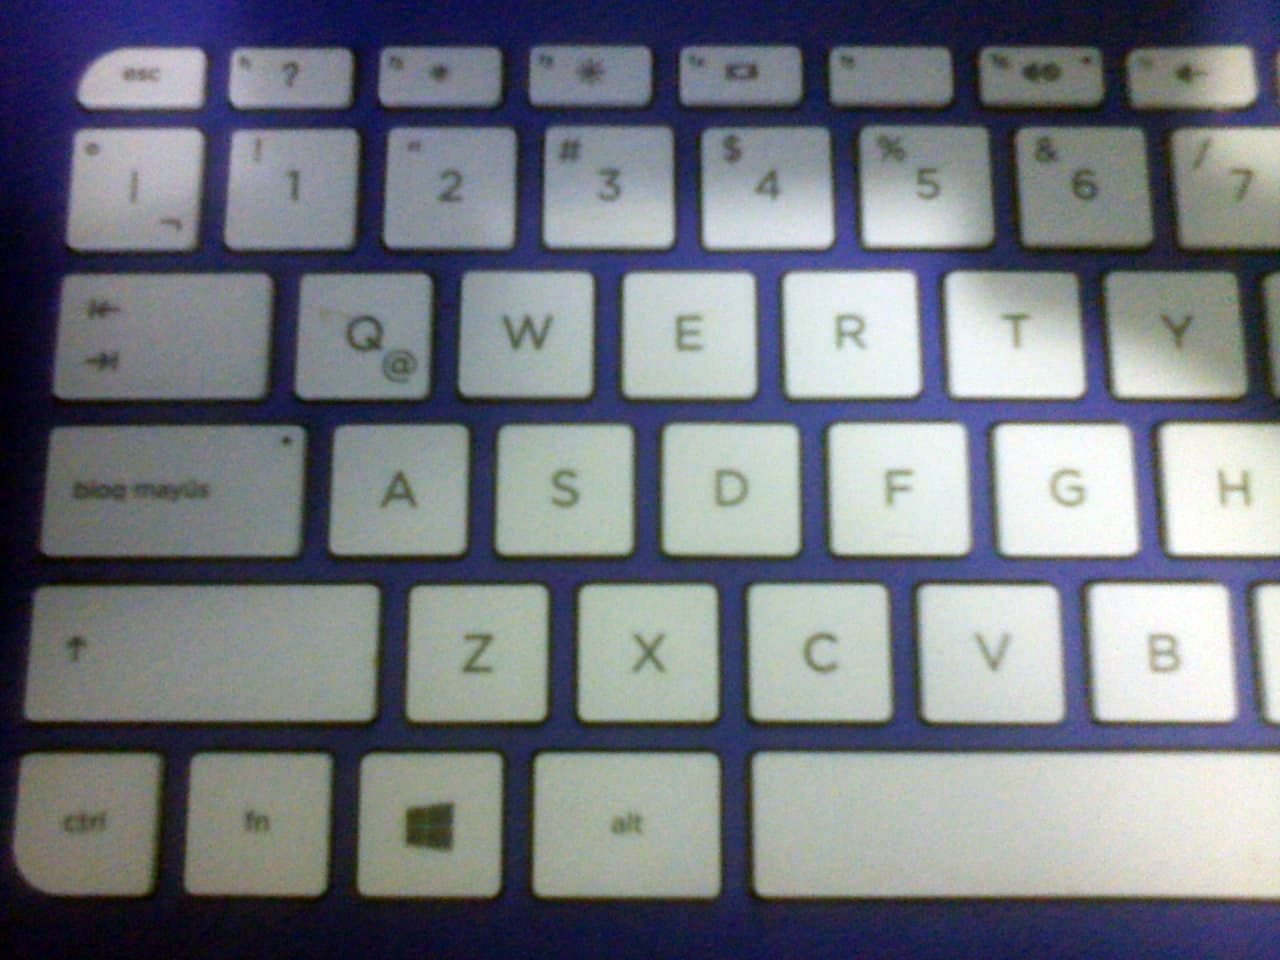 [SOLVED] Can't find the right keyboard layout for netbook! 8113f081-5e61-484f-abc4-ac3ae8b69e2d?upload=true.jpg